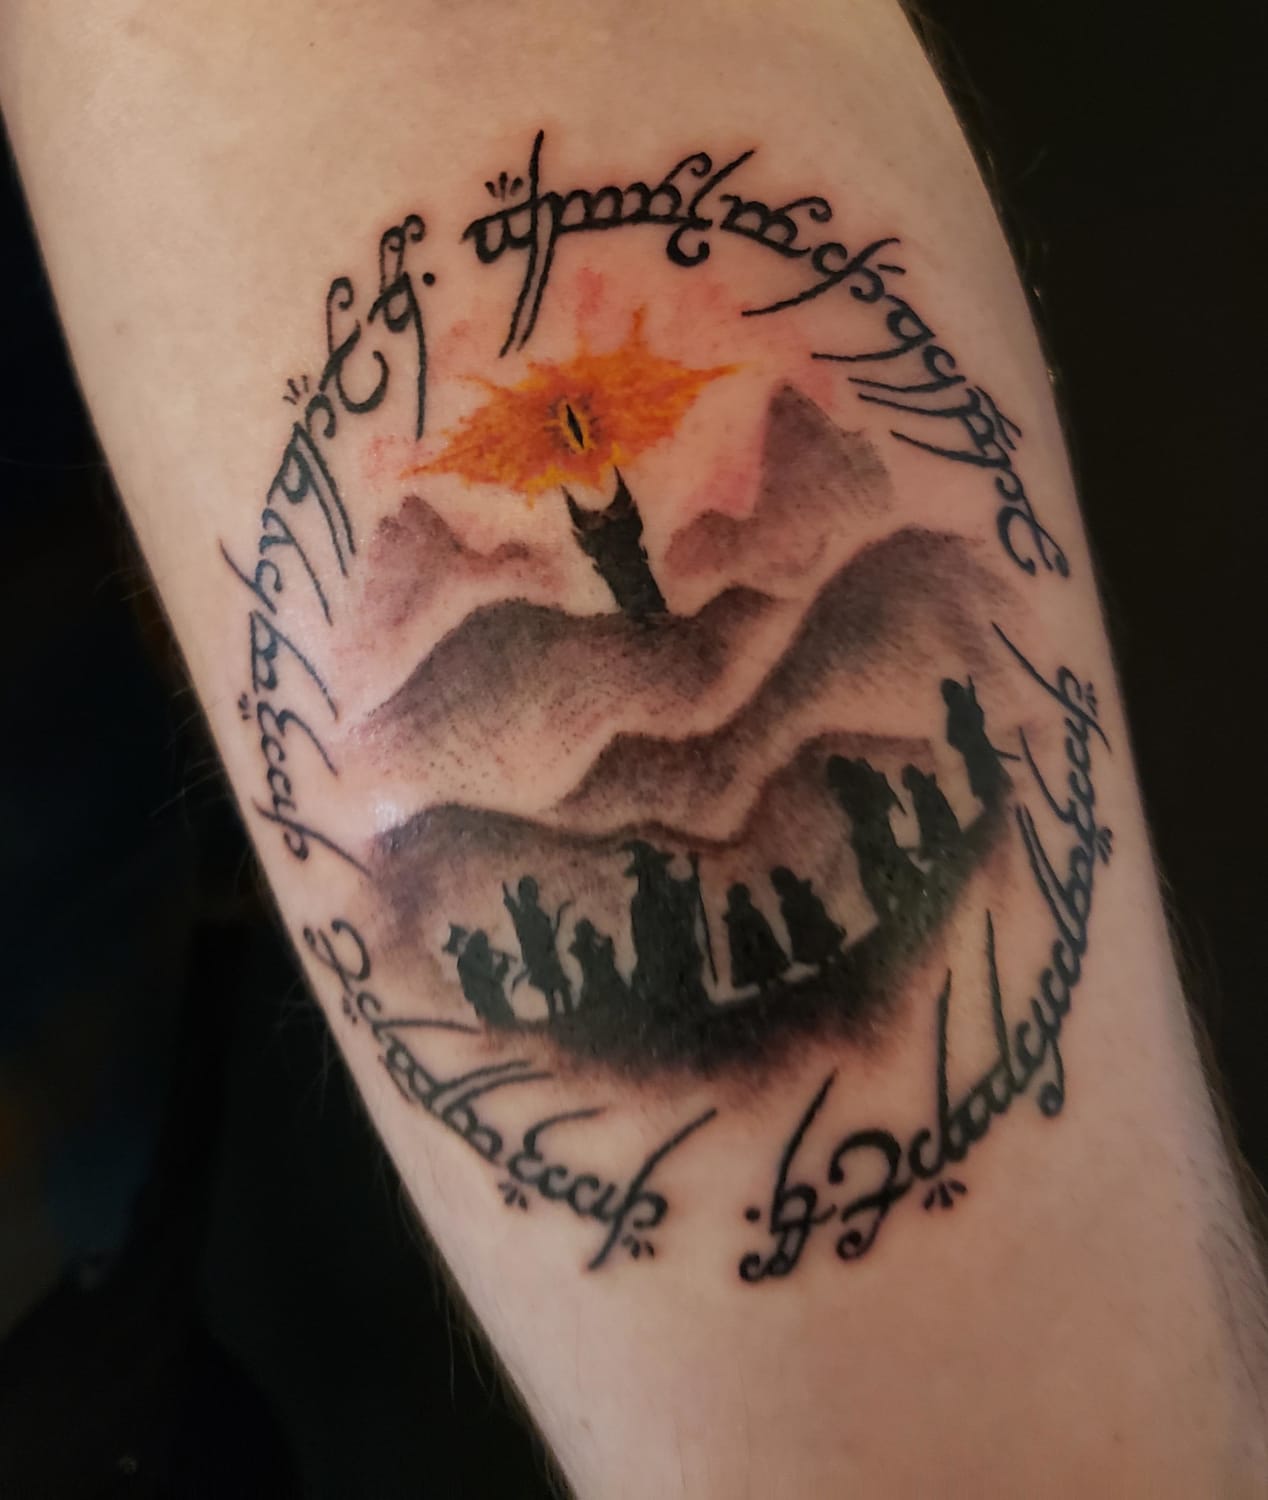 New LotR tattoo by Adam Spivak at HeartStrong in Toronto, ON